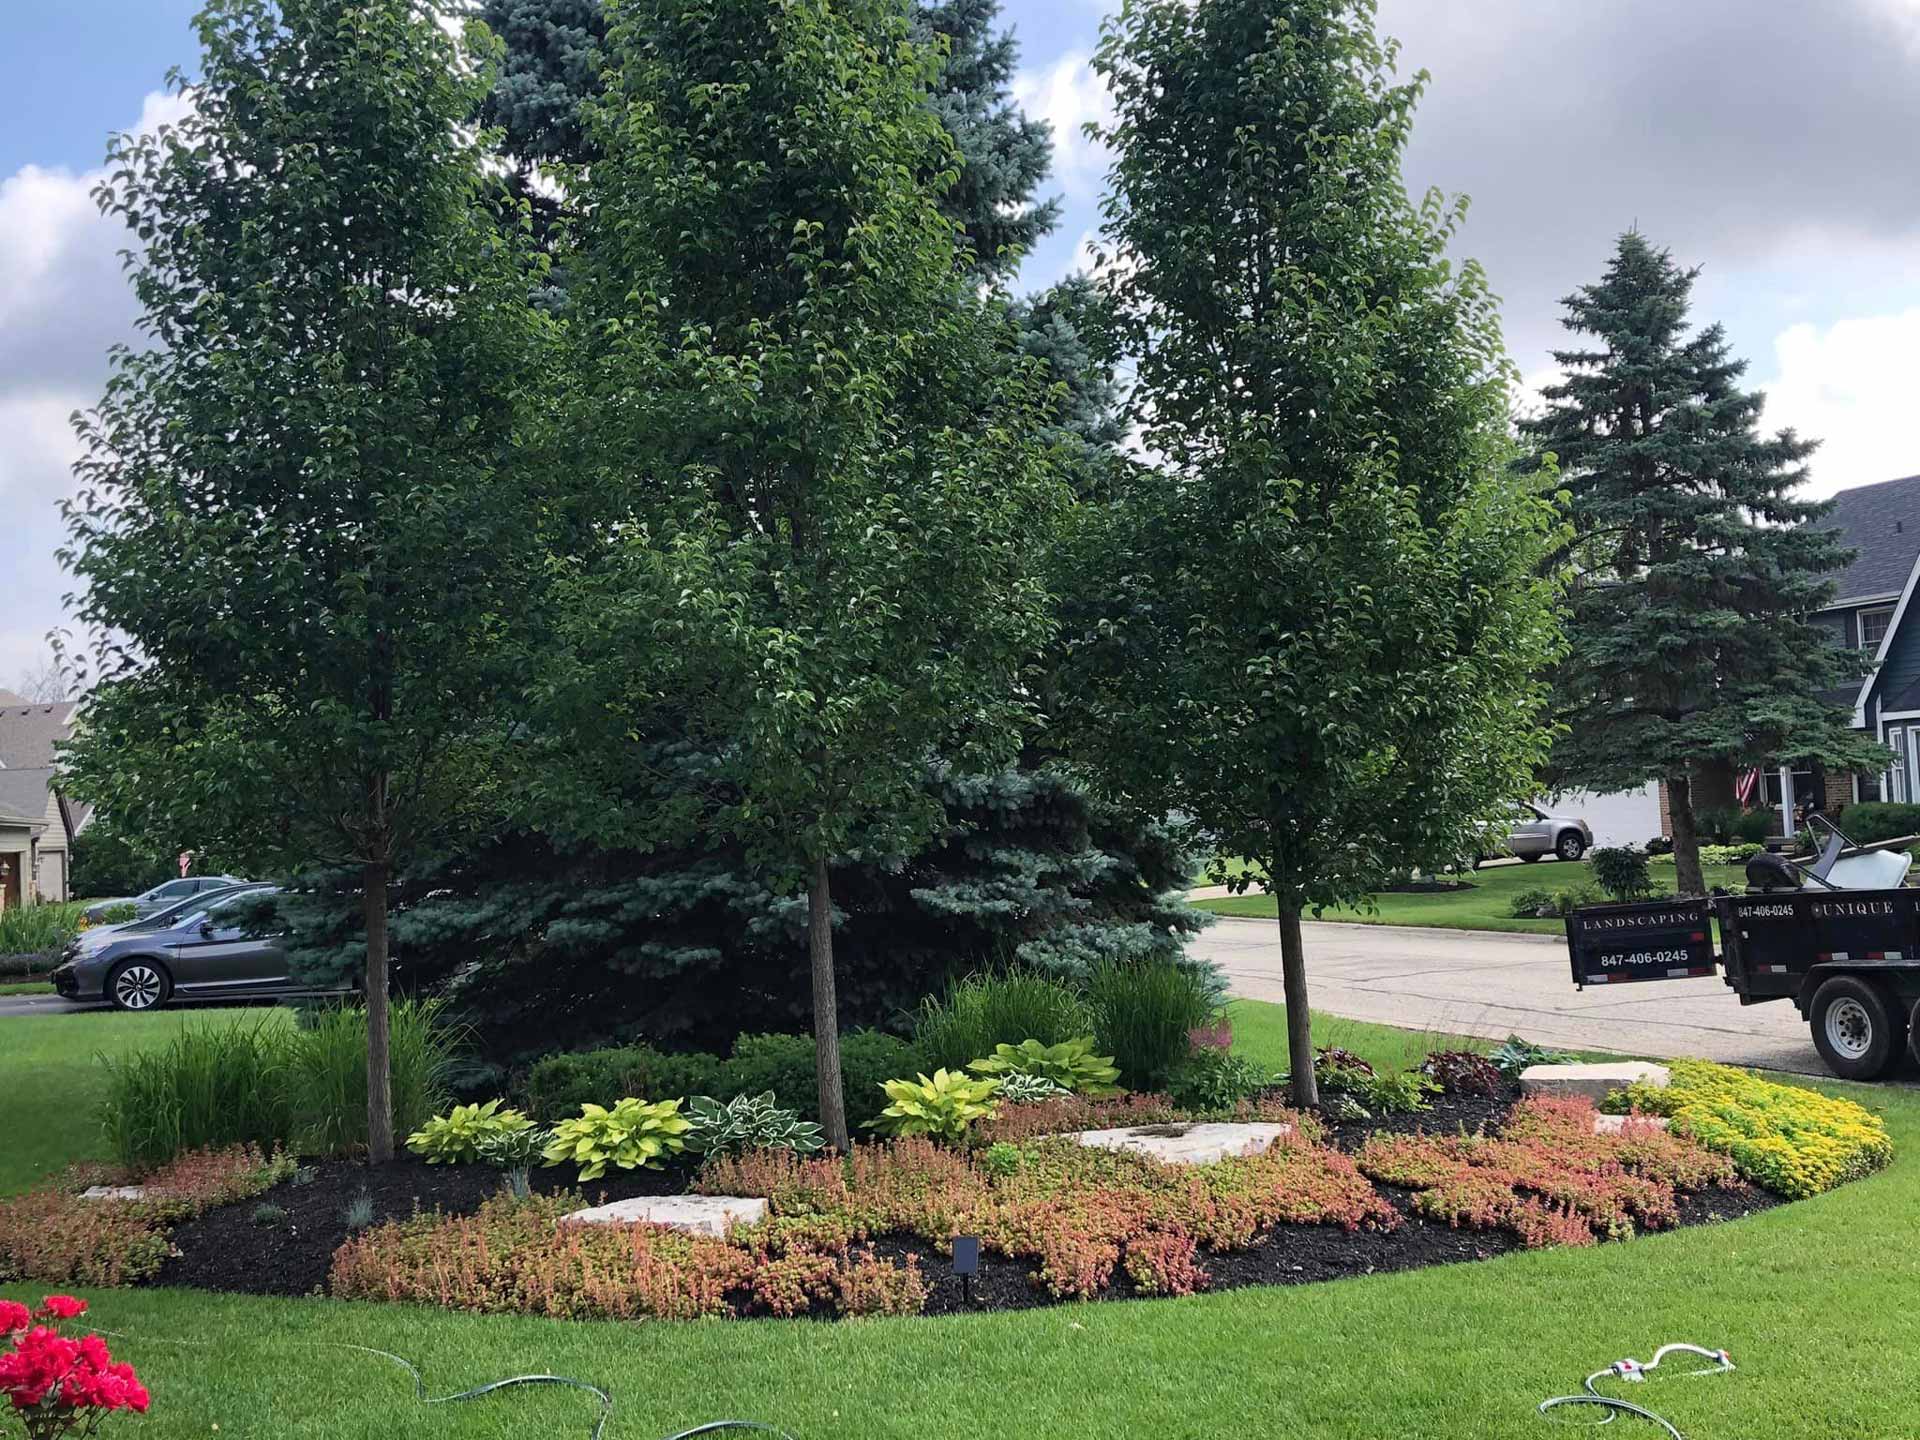 Flower bed with three newly planted trees